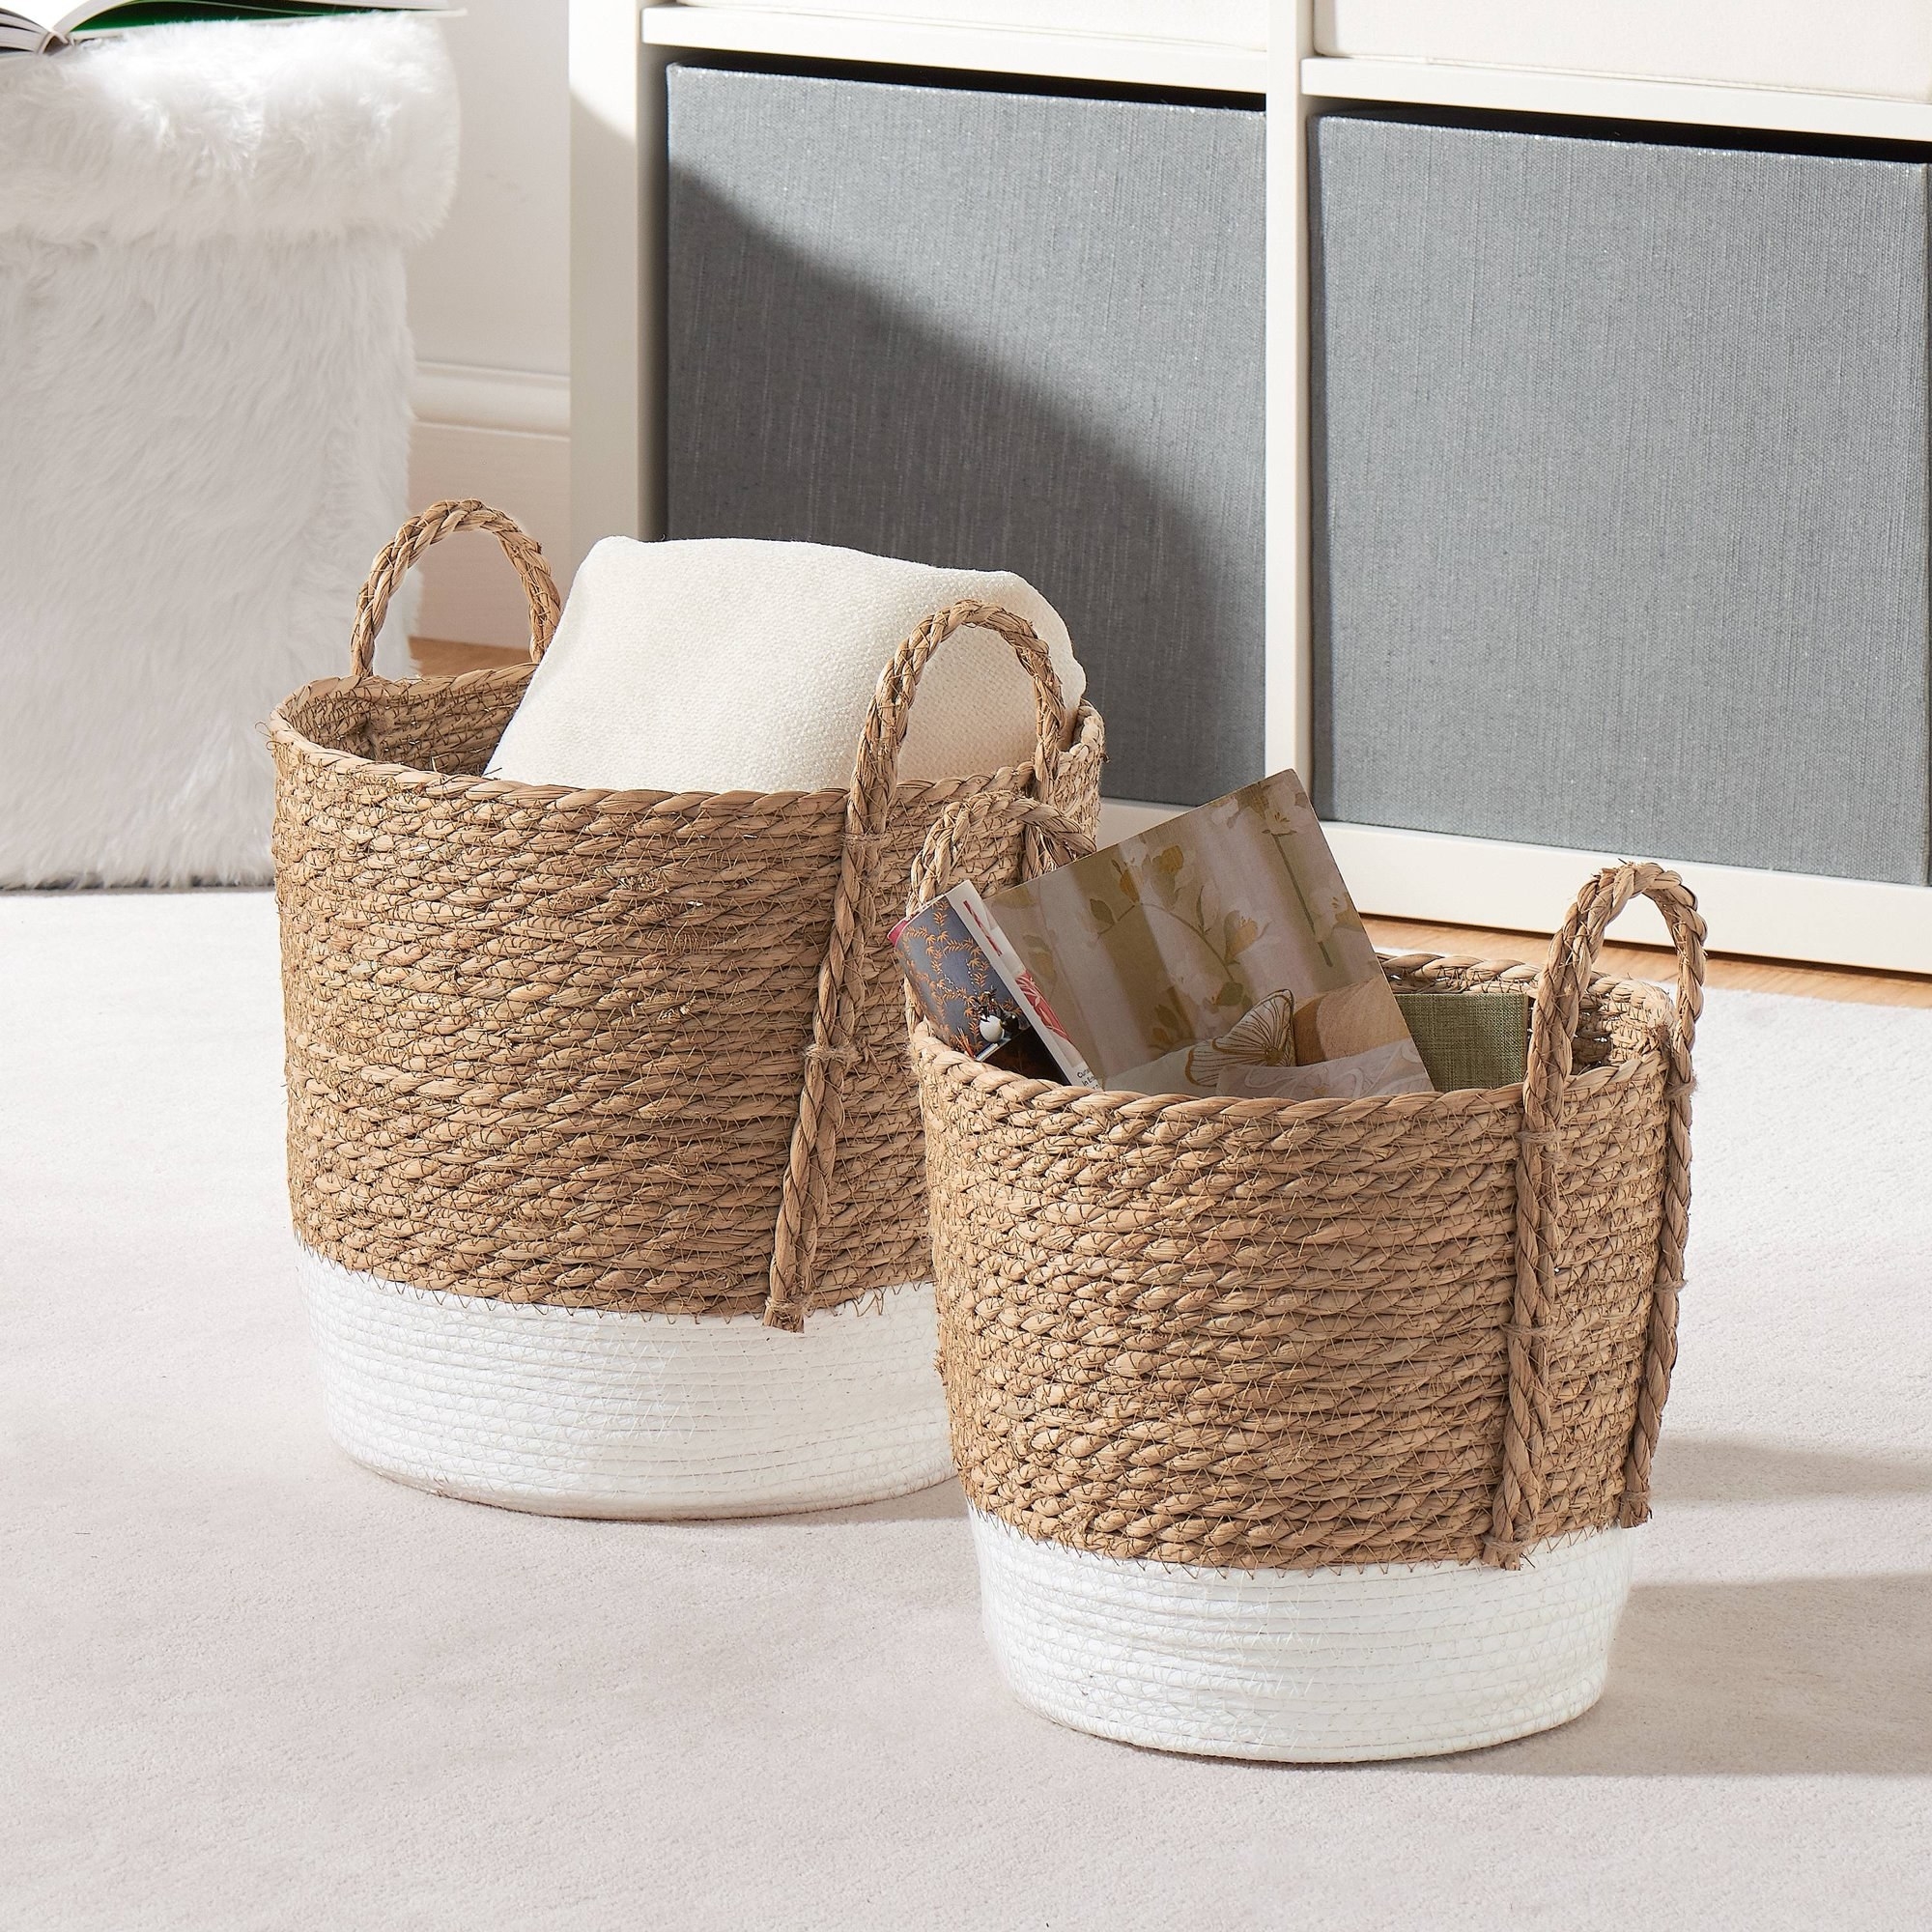 The baskets